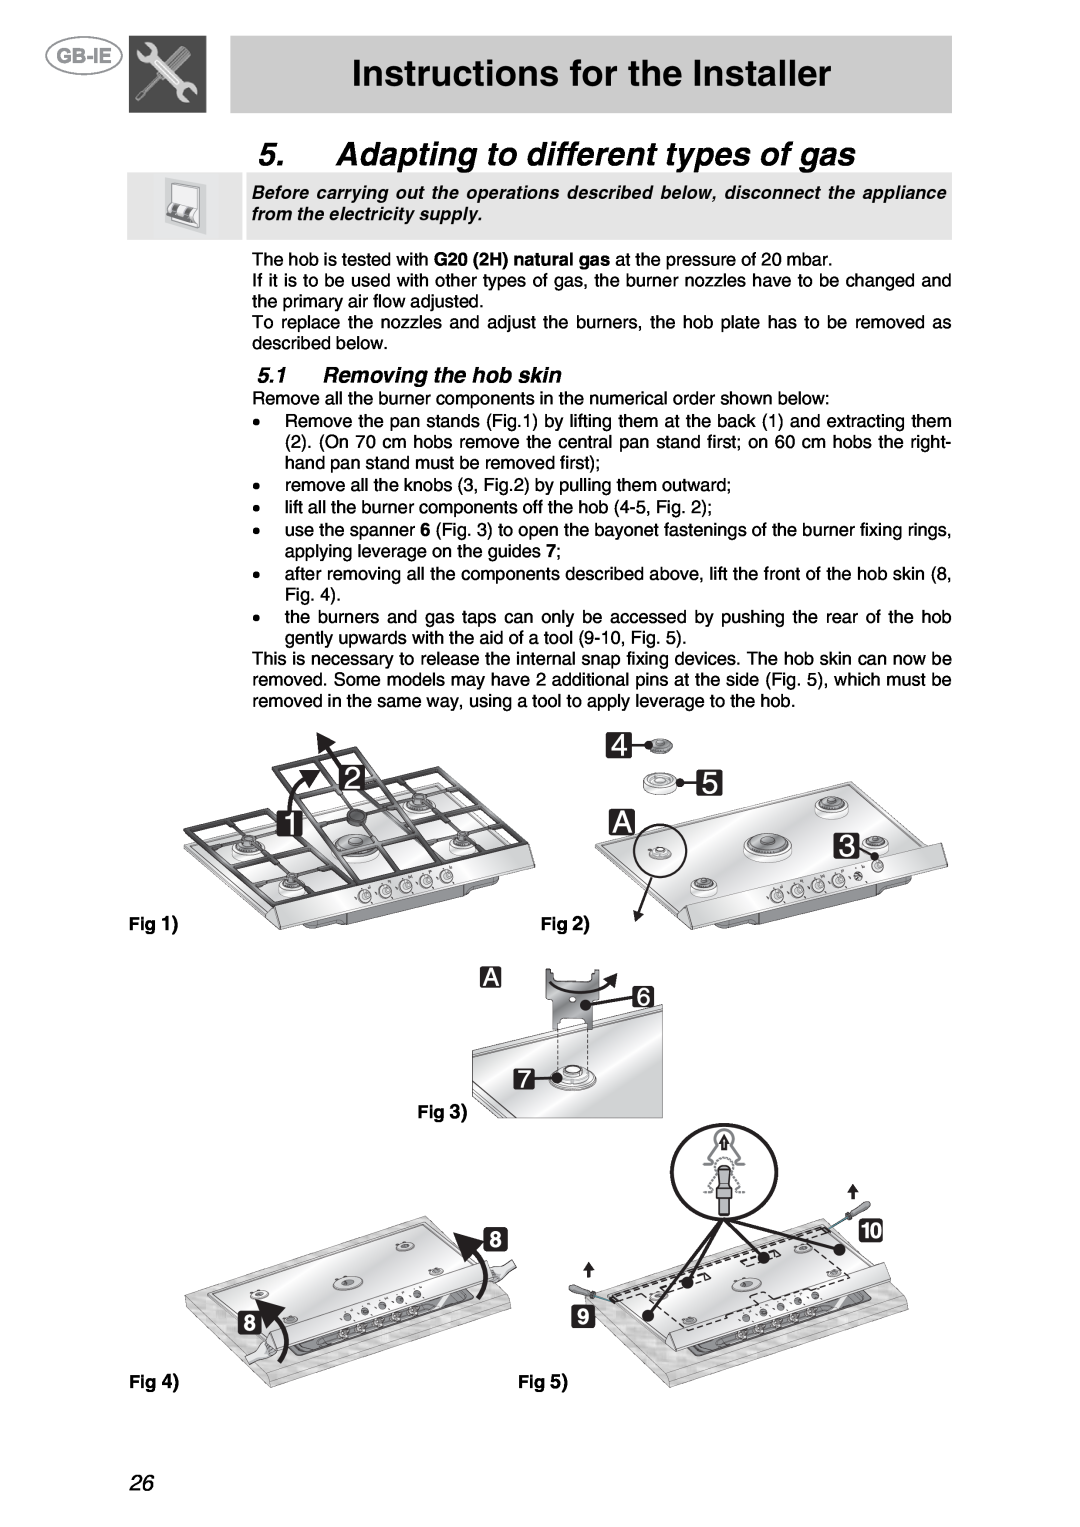 Smeg GKL755, GKL64-3 manual Adapting to different types of gas, Instructions for the Installer, 5.1Removing the hob skin 